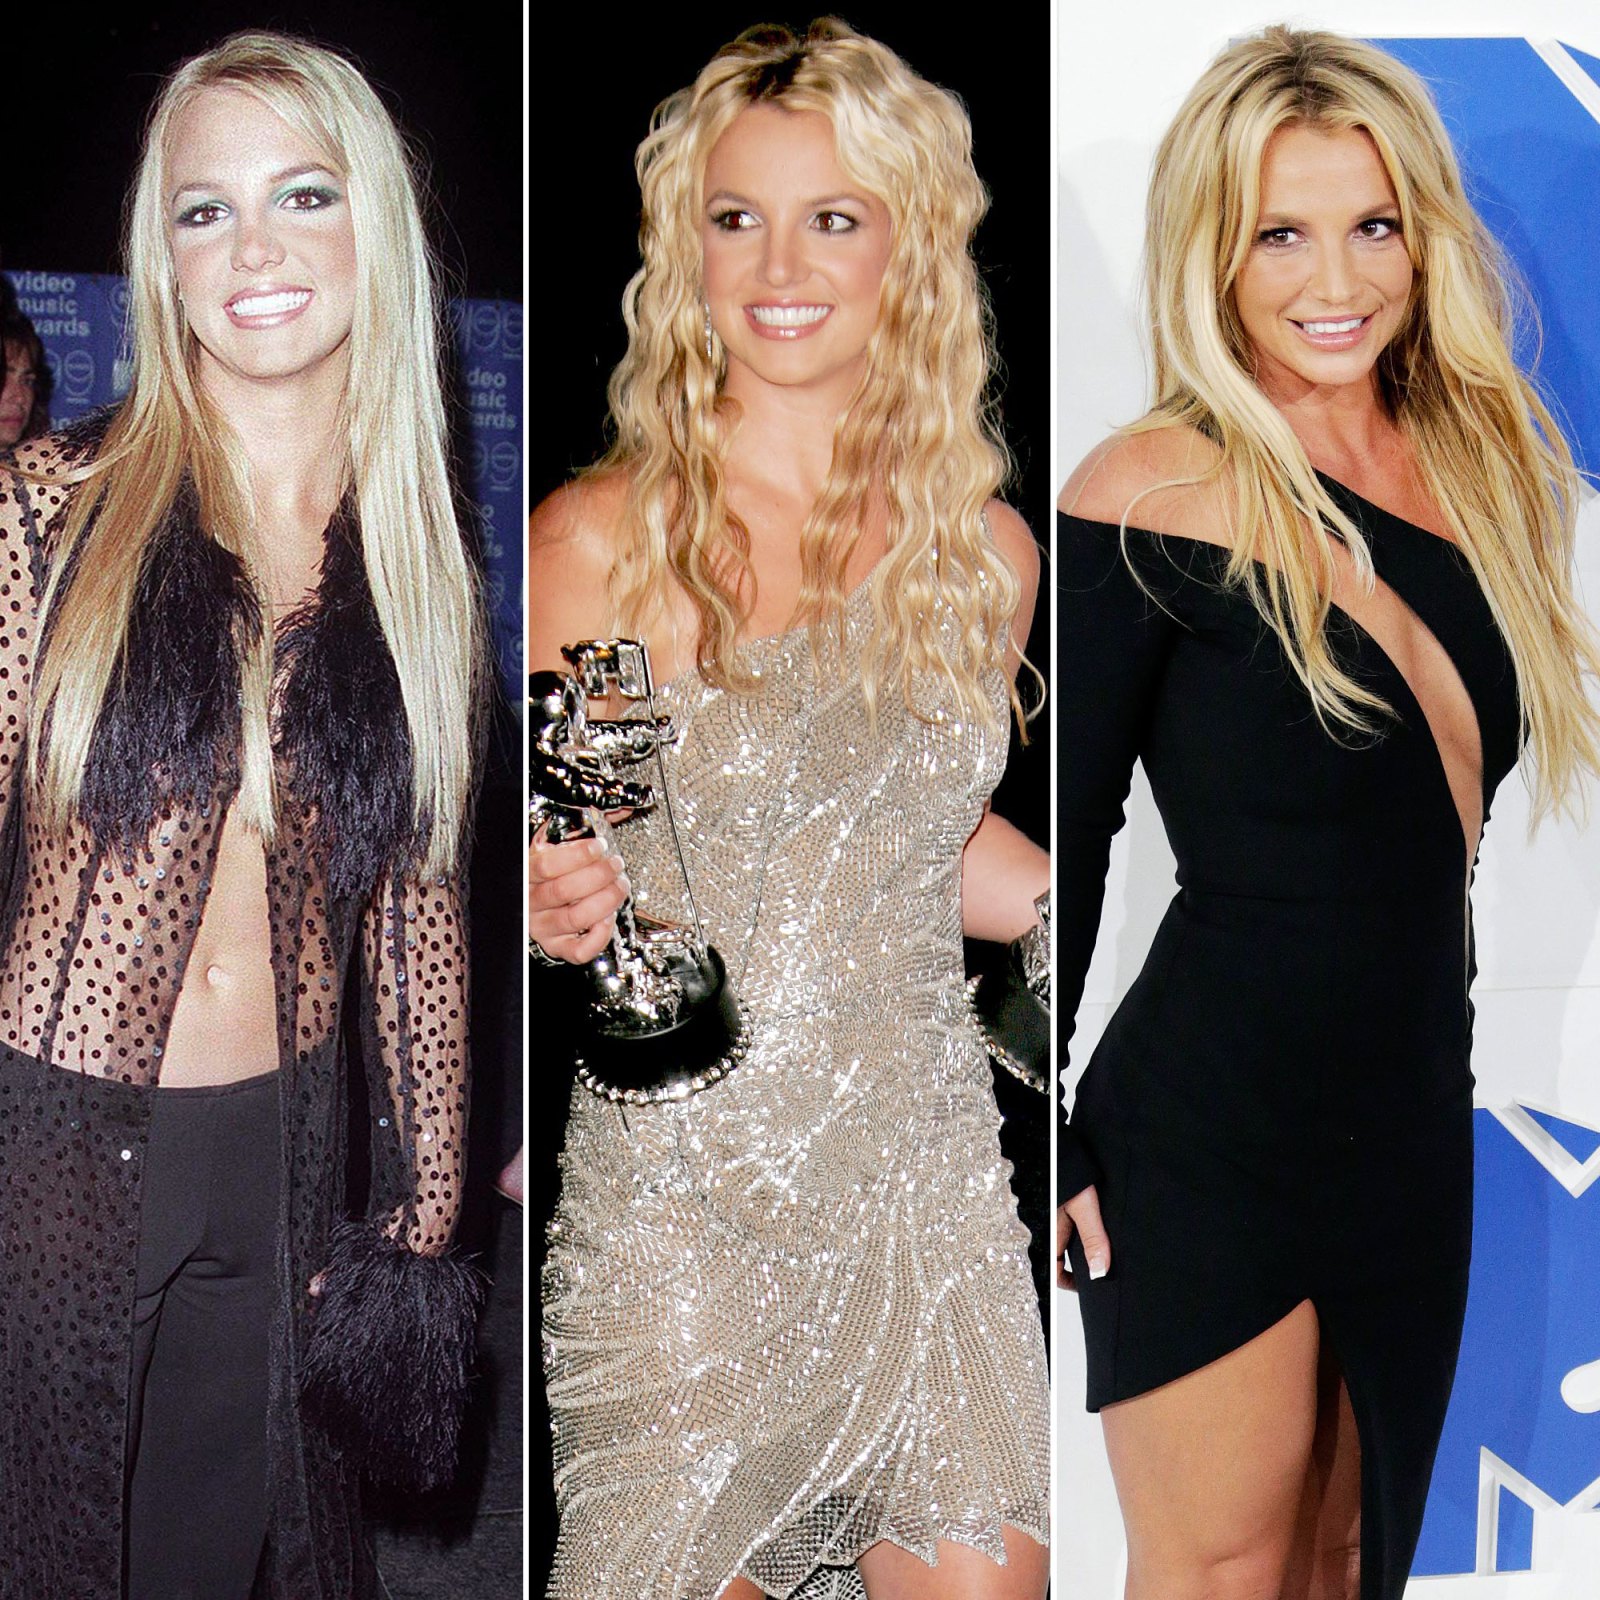 Britney Spears Best and Worst VMA Looks